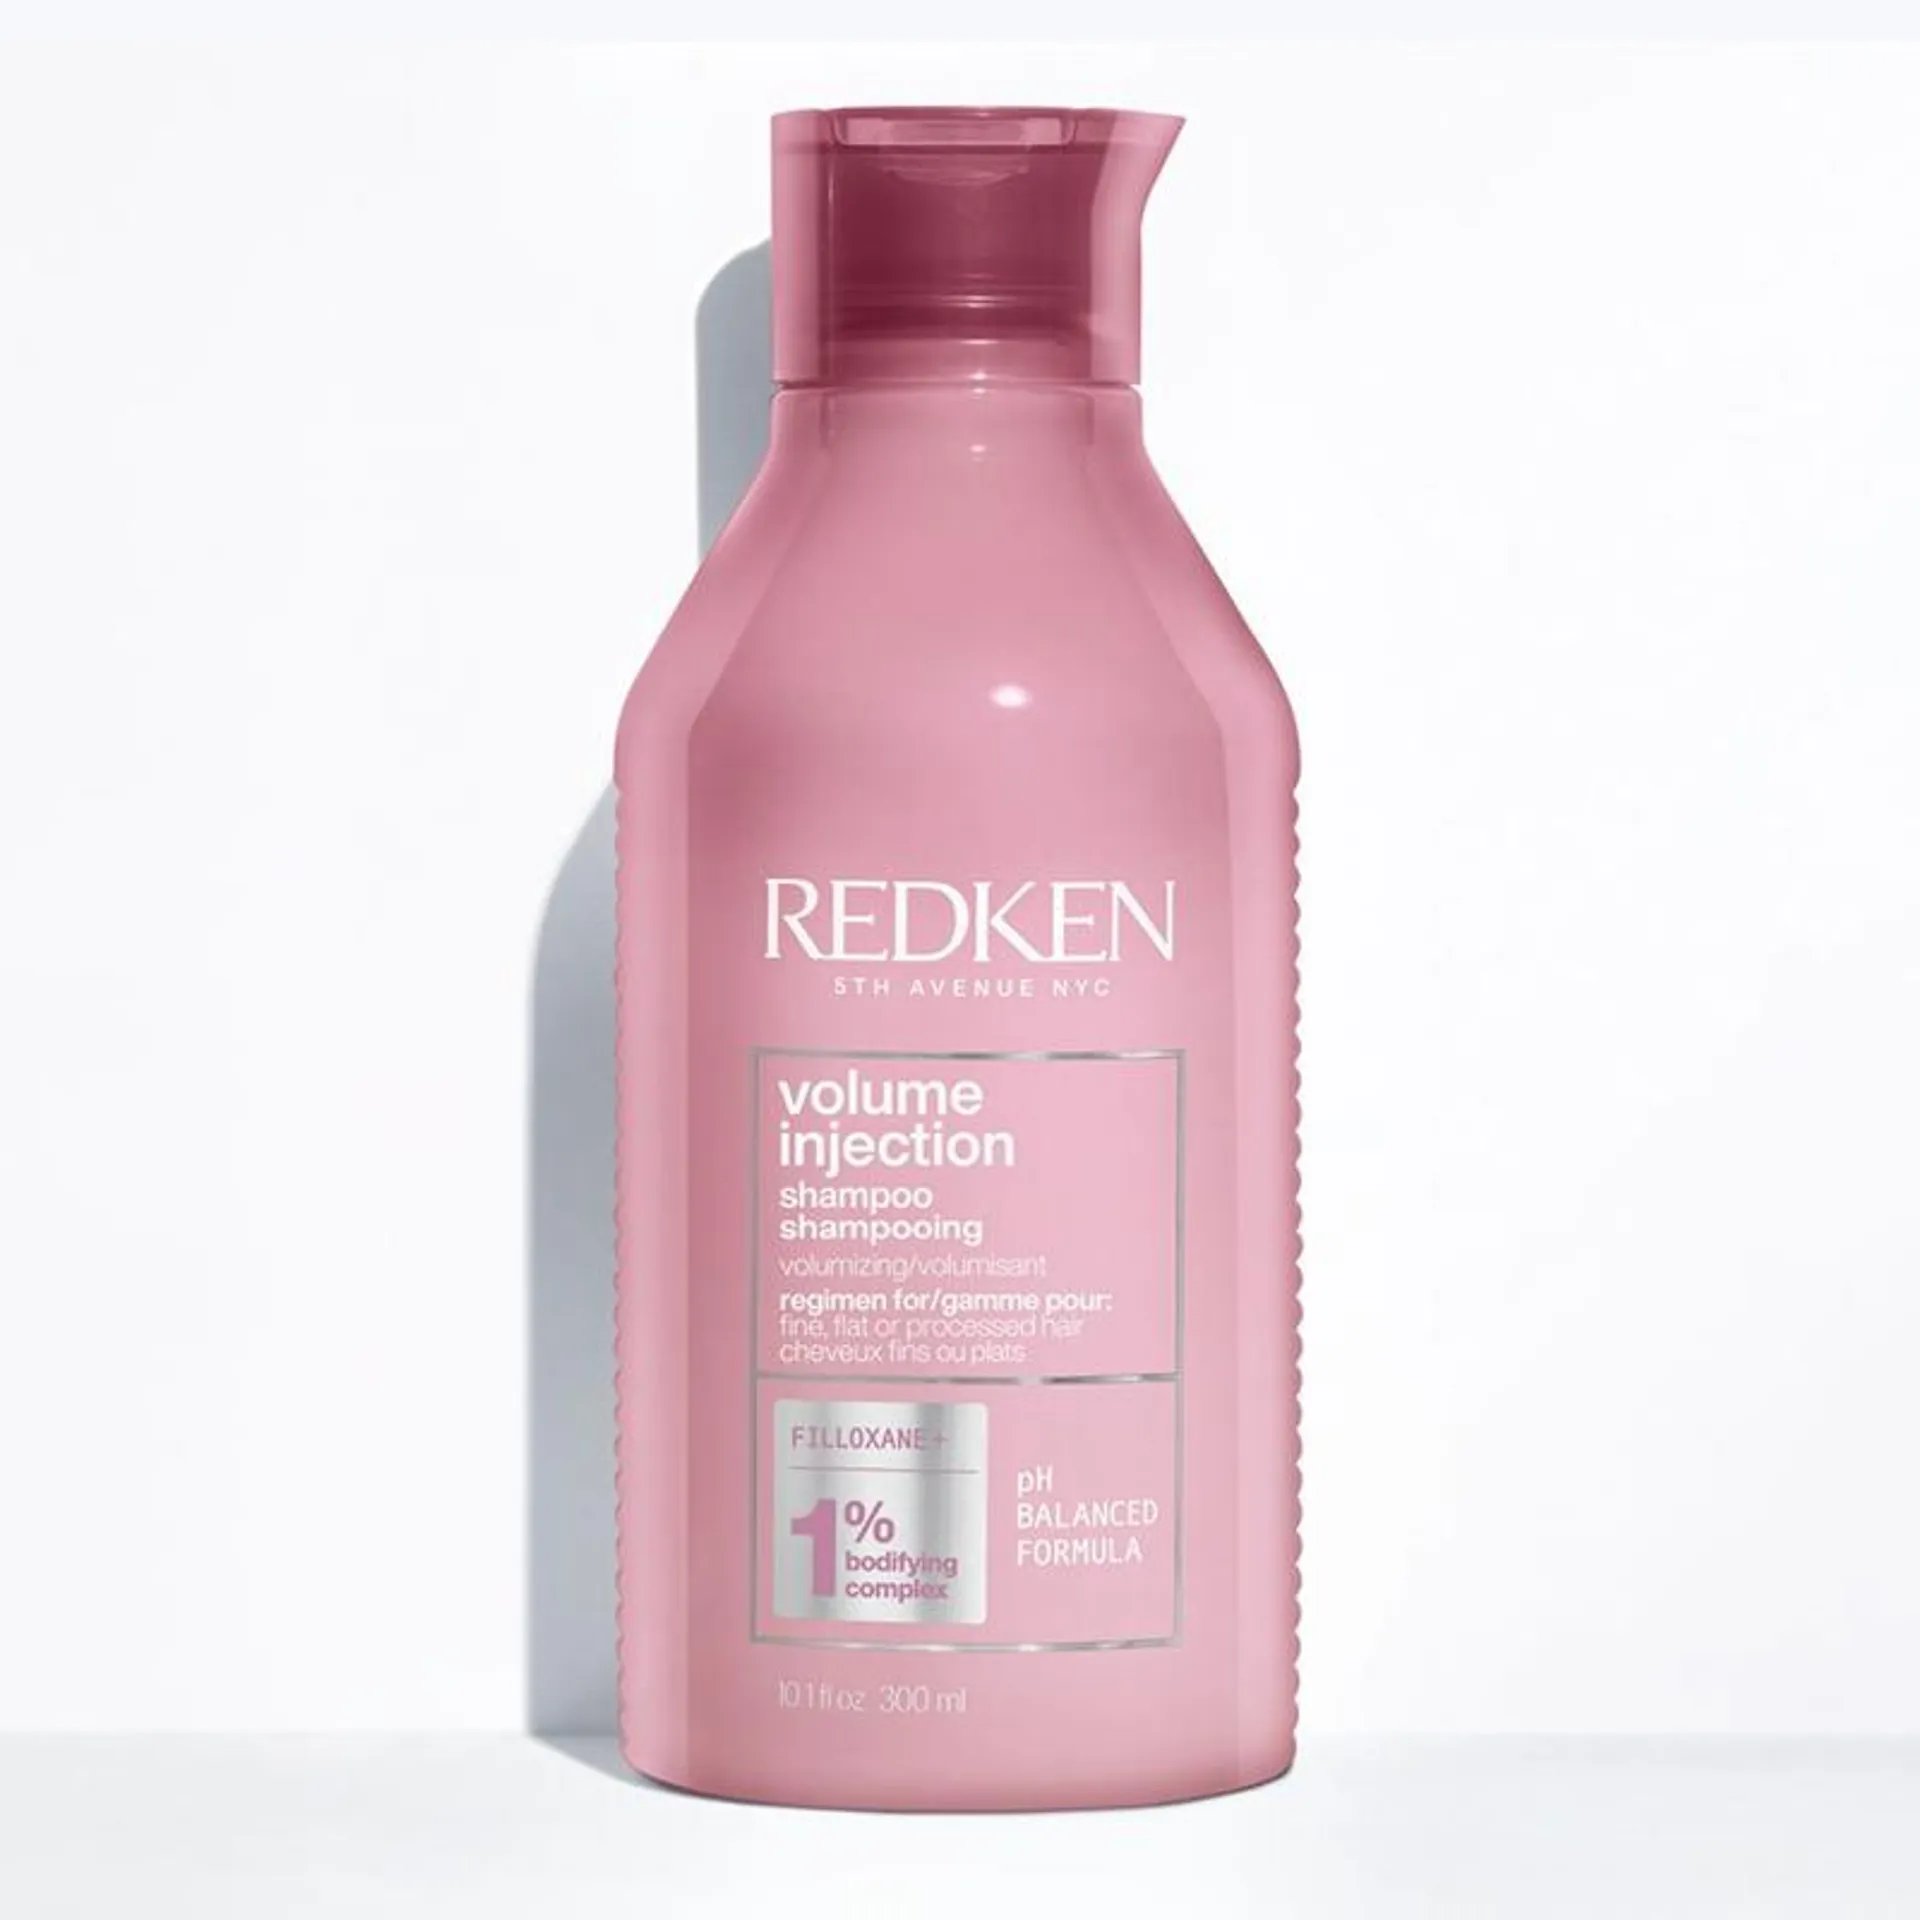 Volume Injection Shampooing - 300ml